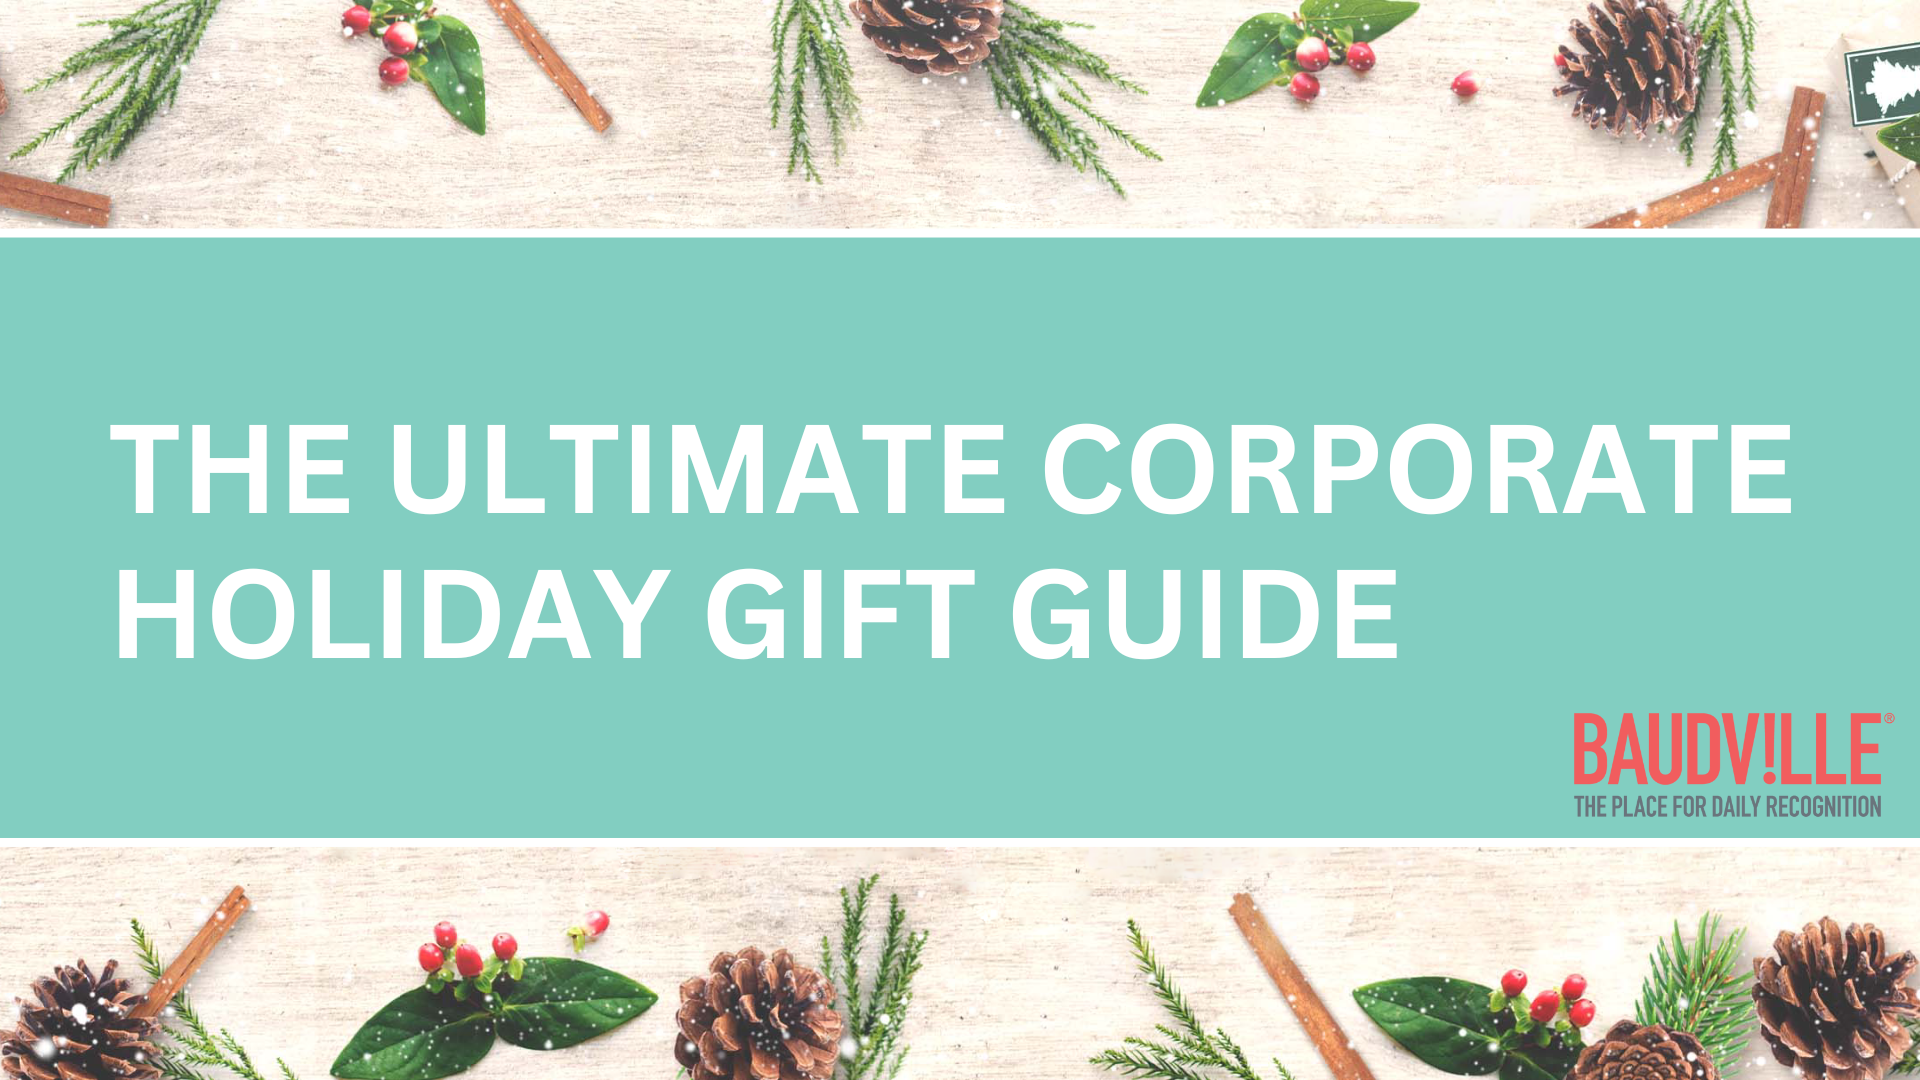 The Ultimate Corporate Holiday Gift Guide